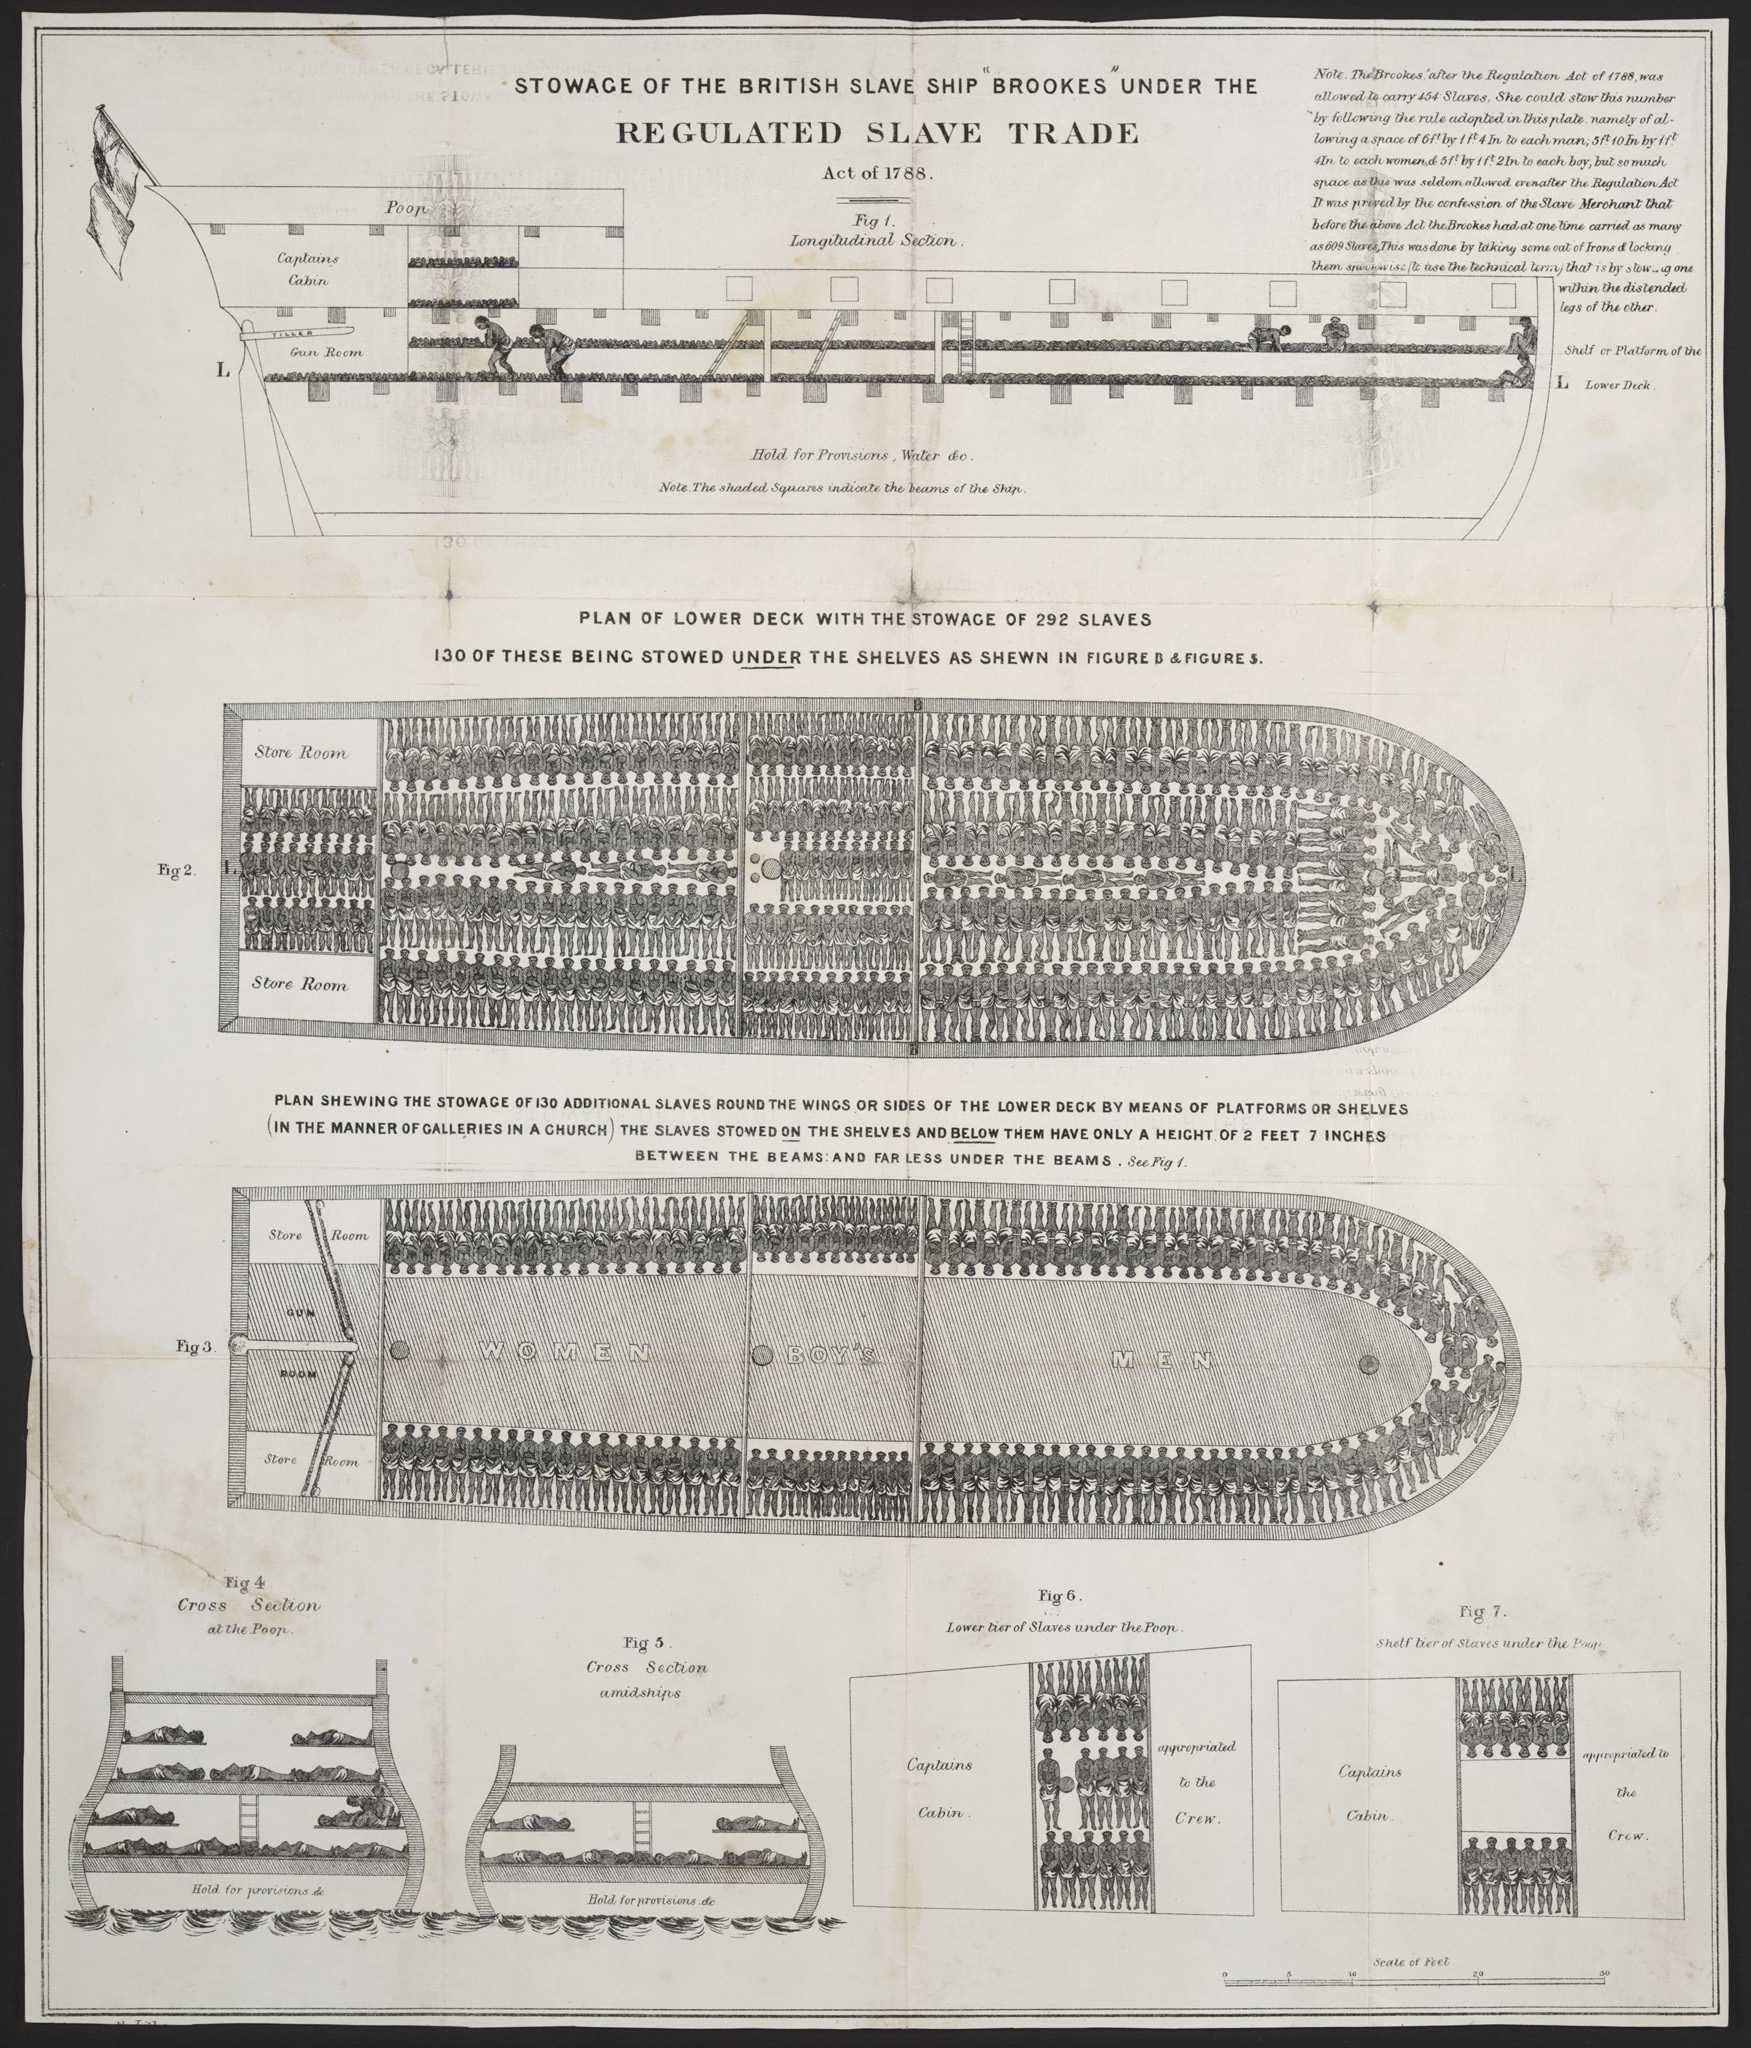 The historic illustration of the 'Brookes' slave ship